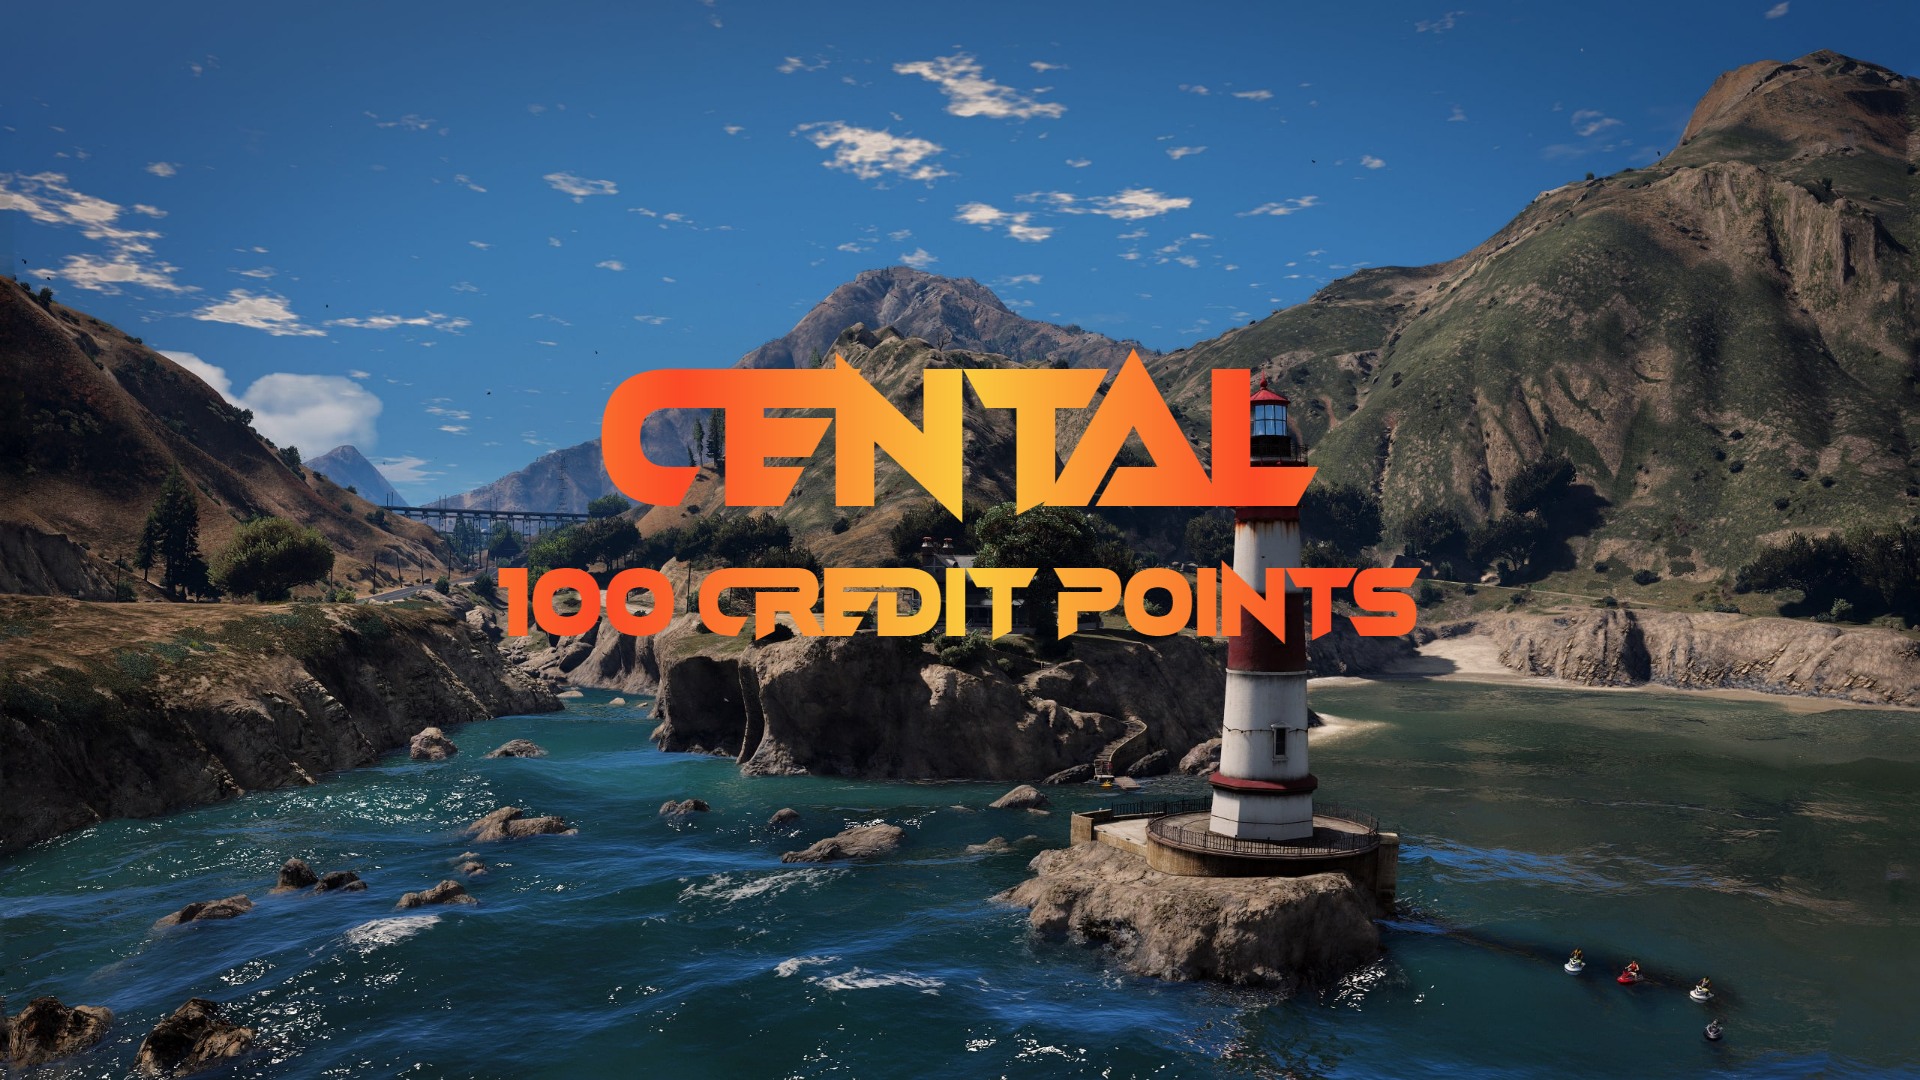 CentralRP - 100 Credit Points Gift Card [$ 11.29]